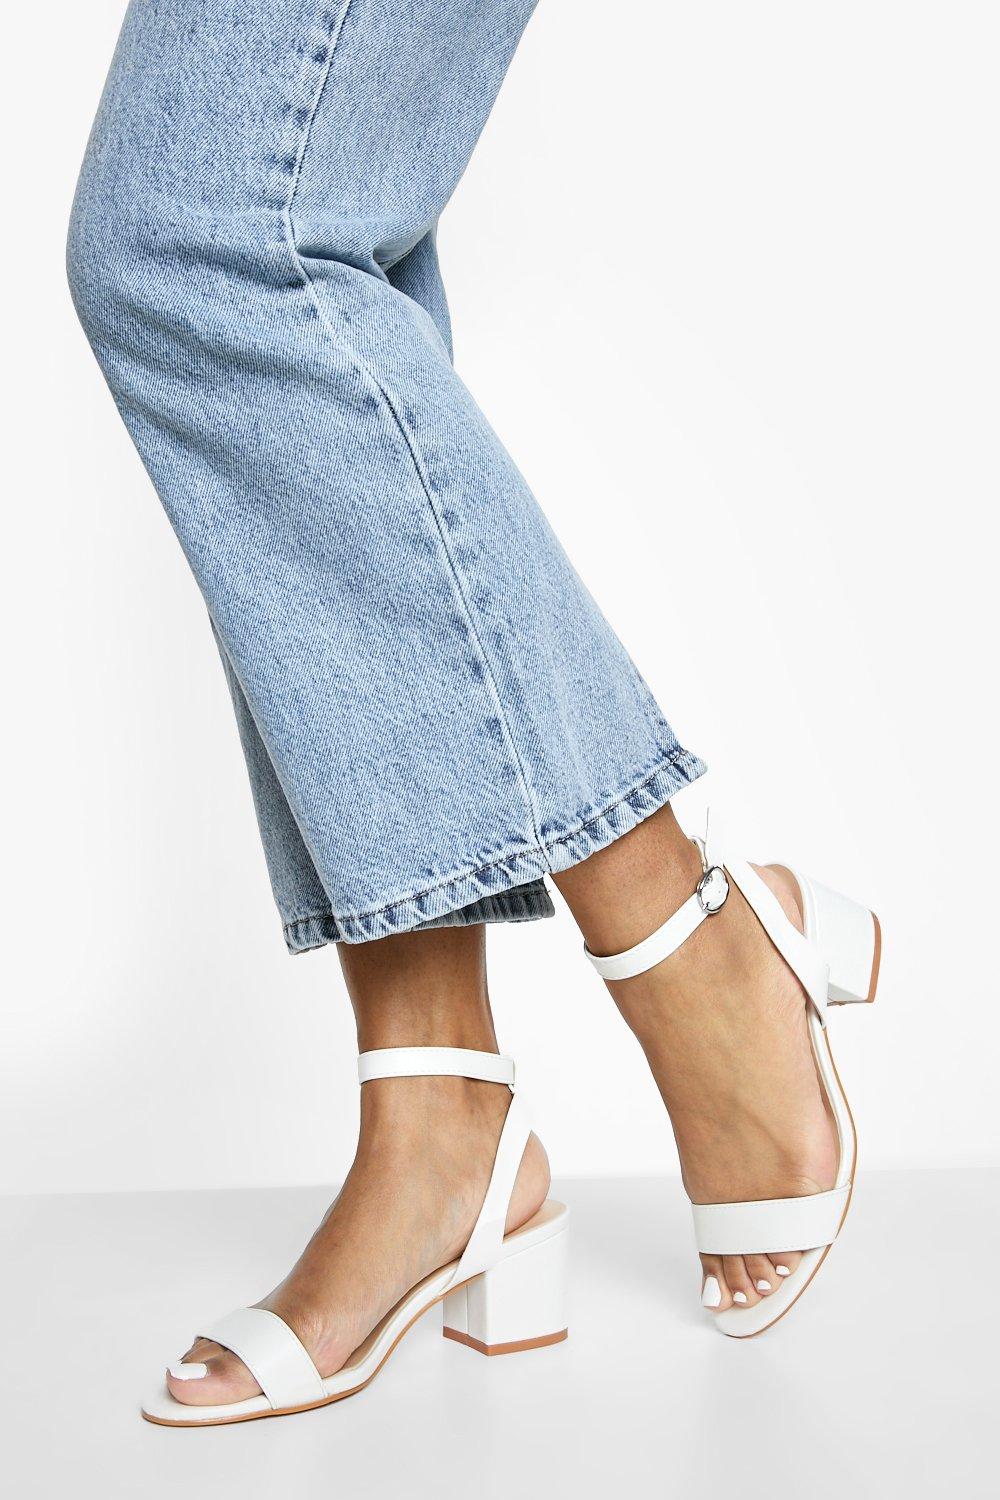 Low Block Barely There Heels | boohoo